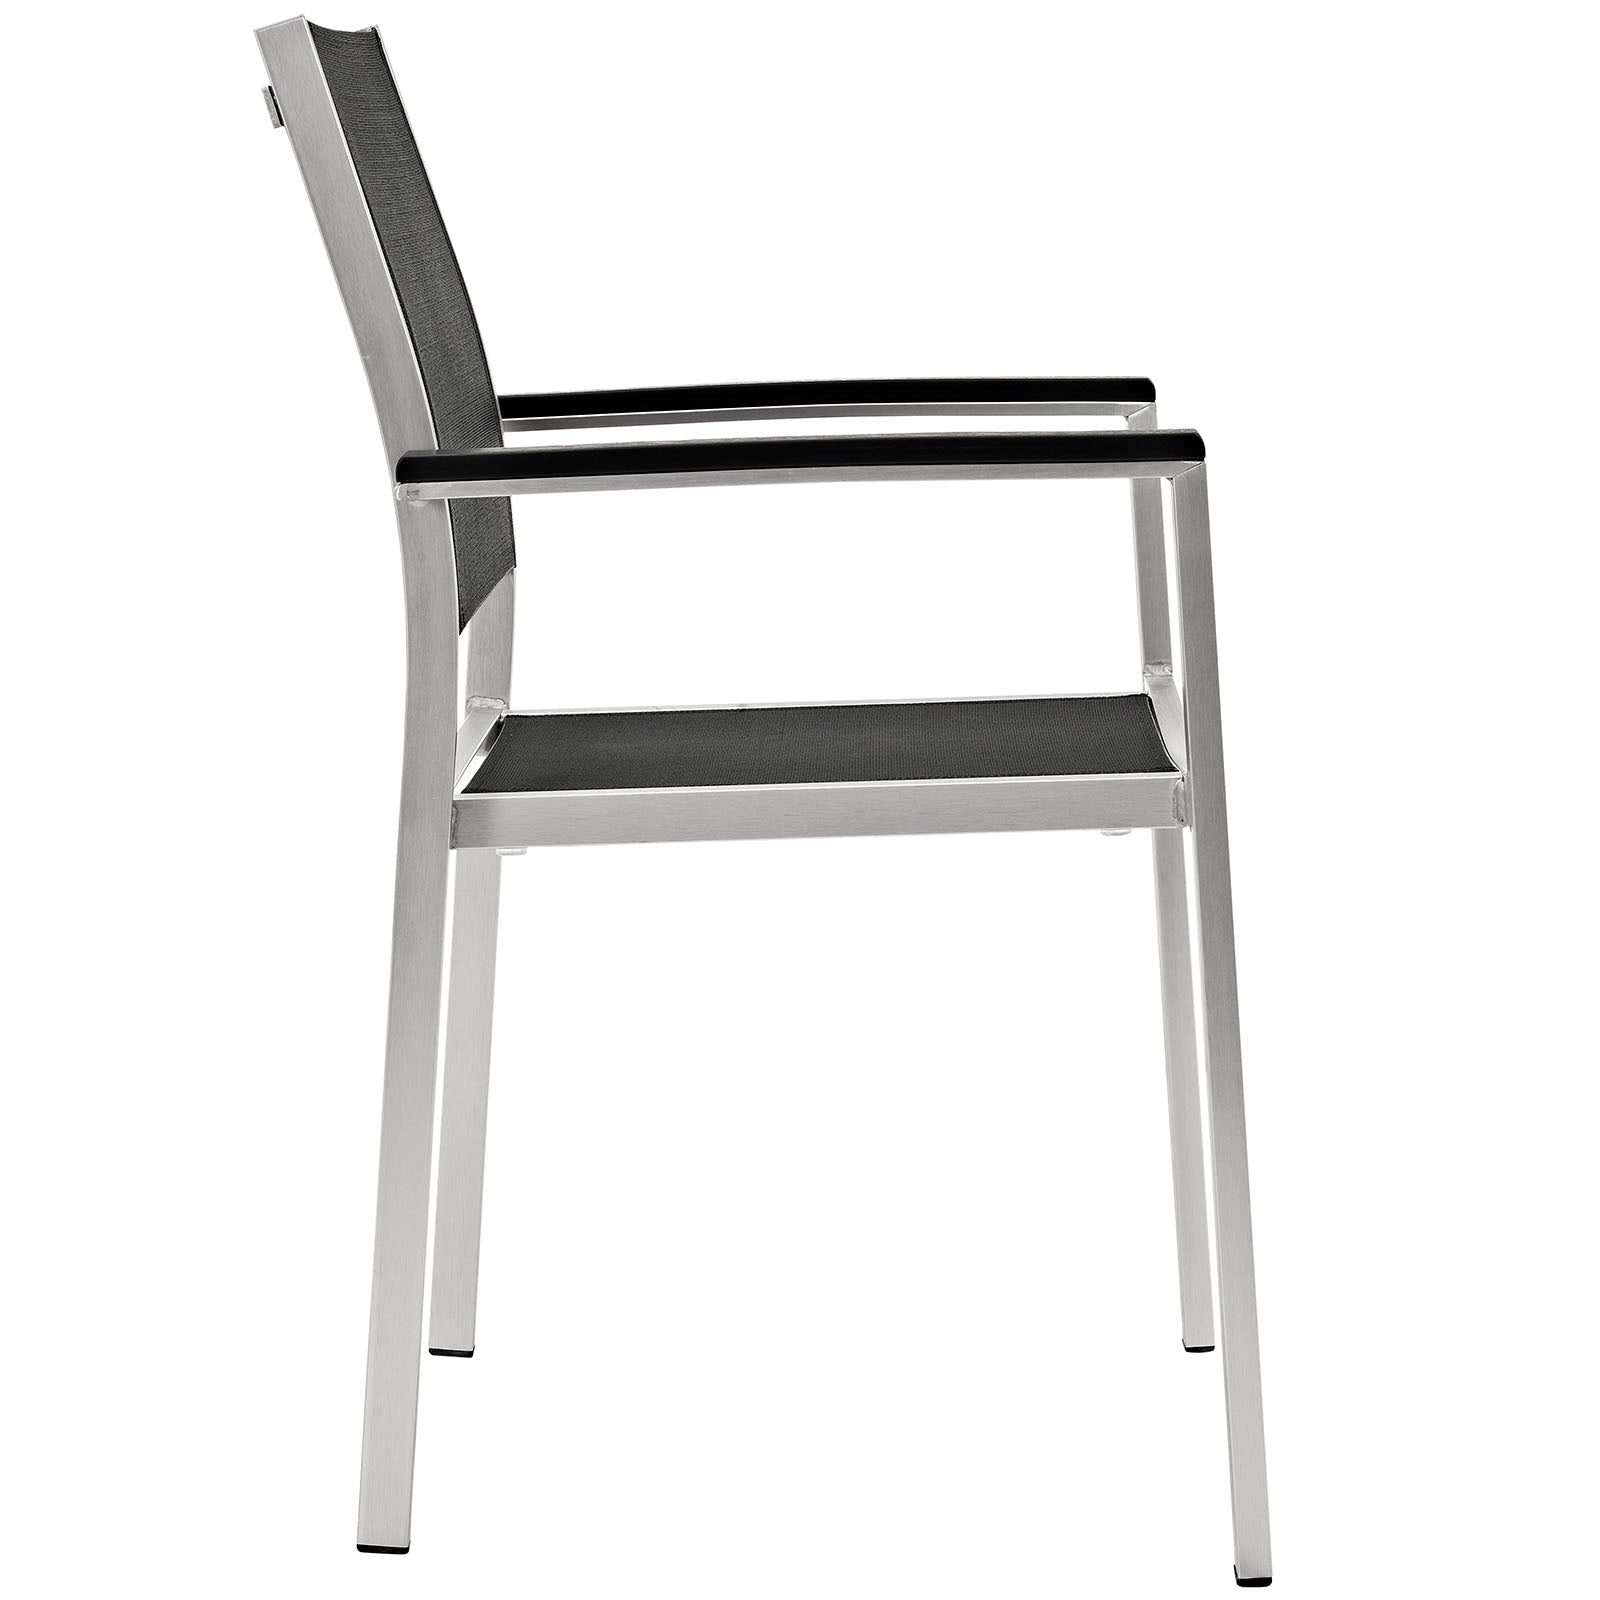 Modway Outdoor Dining Chairs - Shore Dining Chair Outdoor Patio Aluminum Set of 2 Silver Black